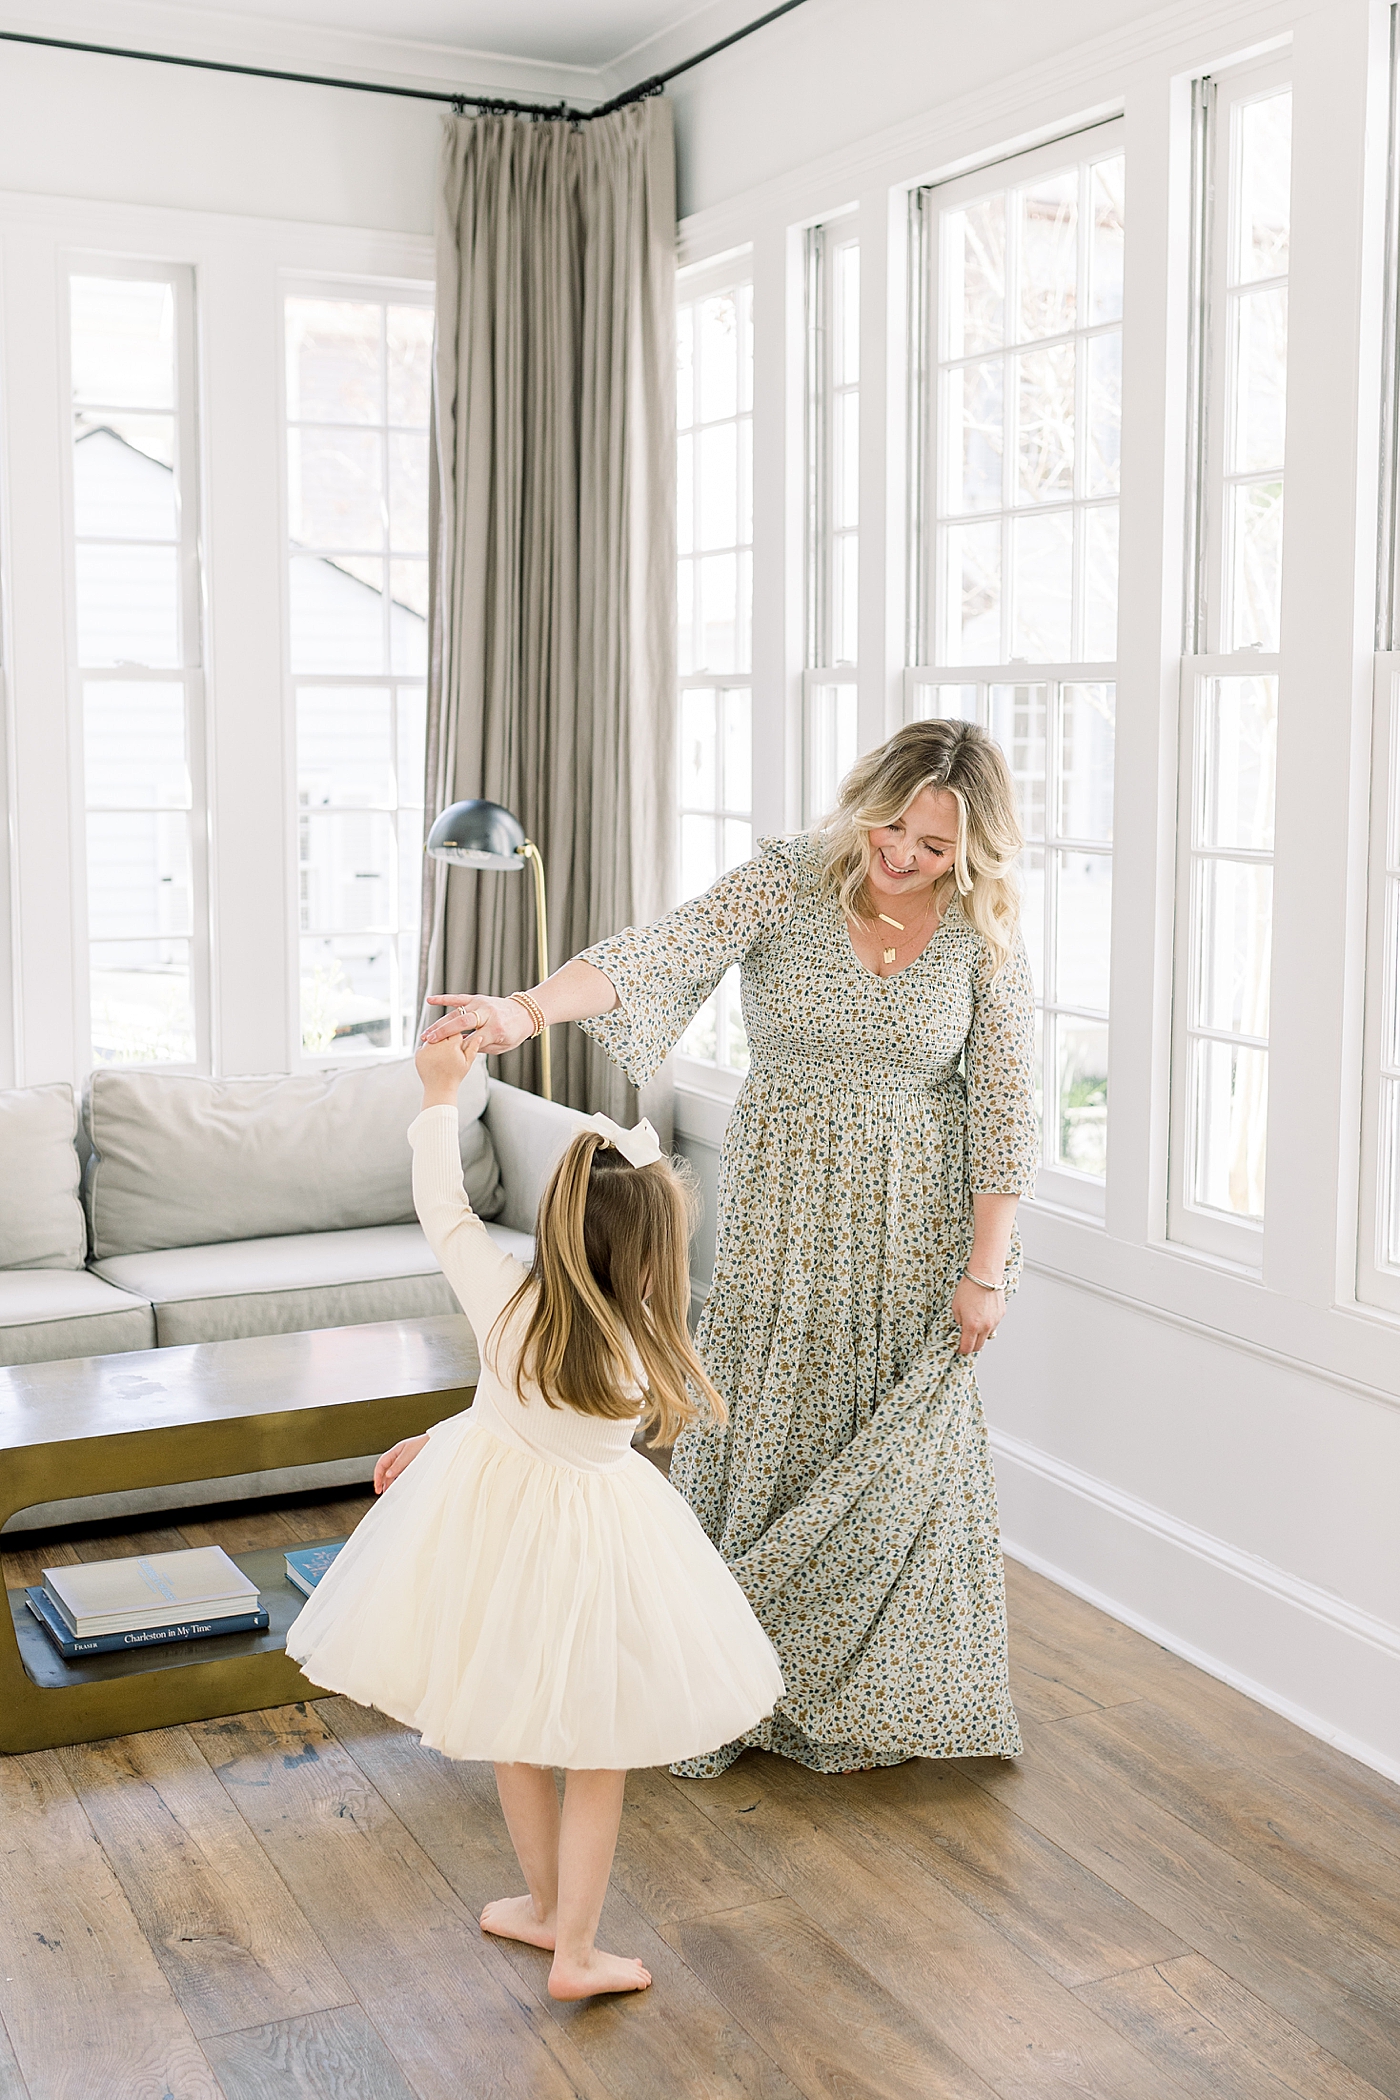 Mom and daughter dancing in their sunny, lit living room | Image by Caitlyn Motycka 